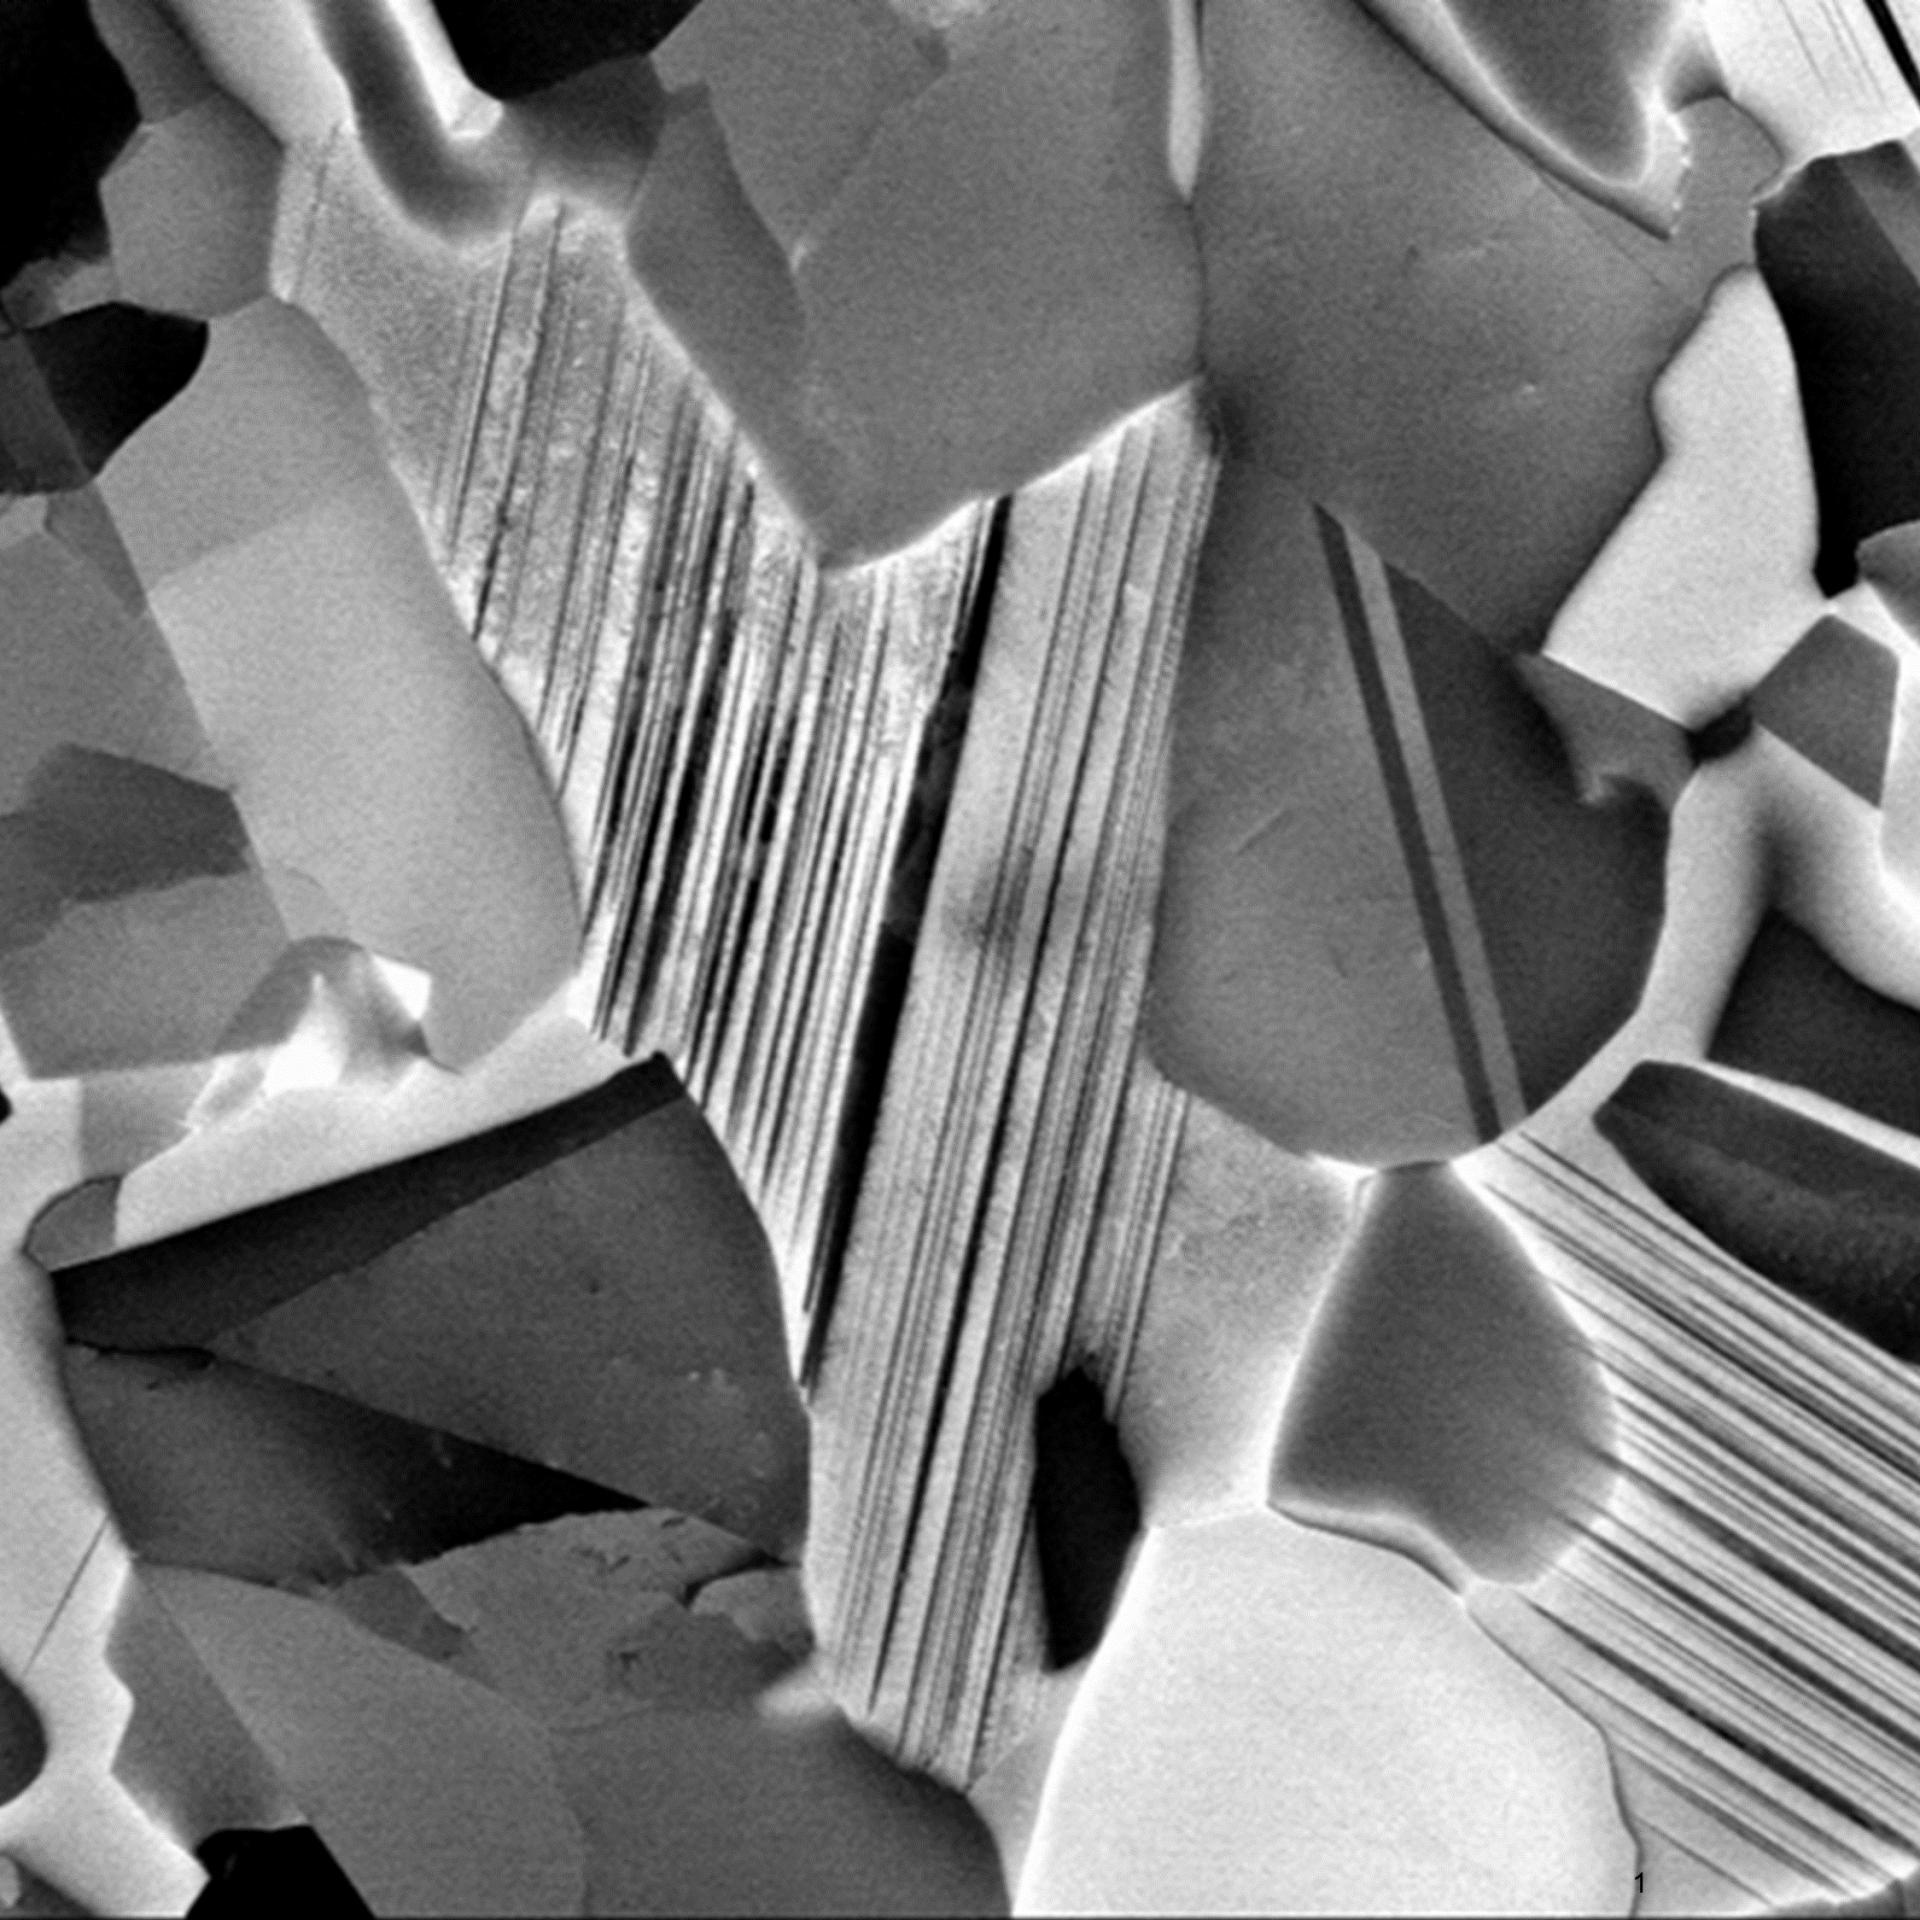 Scanning electron microscopy (SEM) delivers extremely high contrasts of crystal orientations and defects in the high temperature alloy TiAl₂.